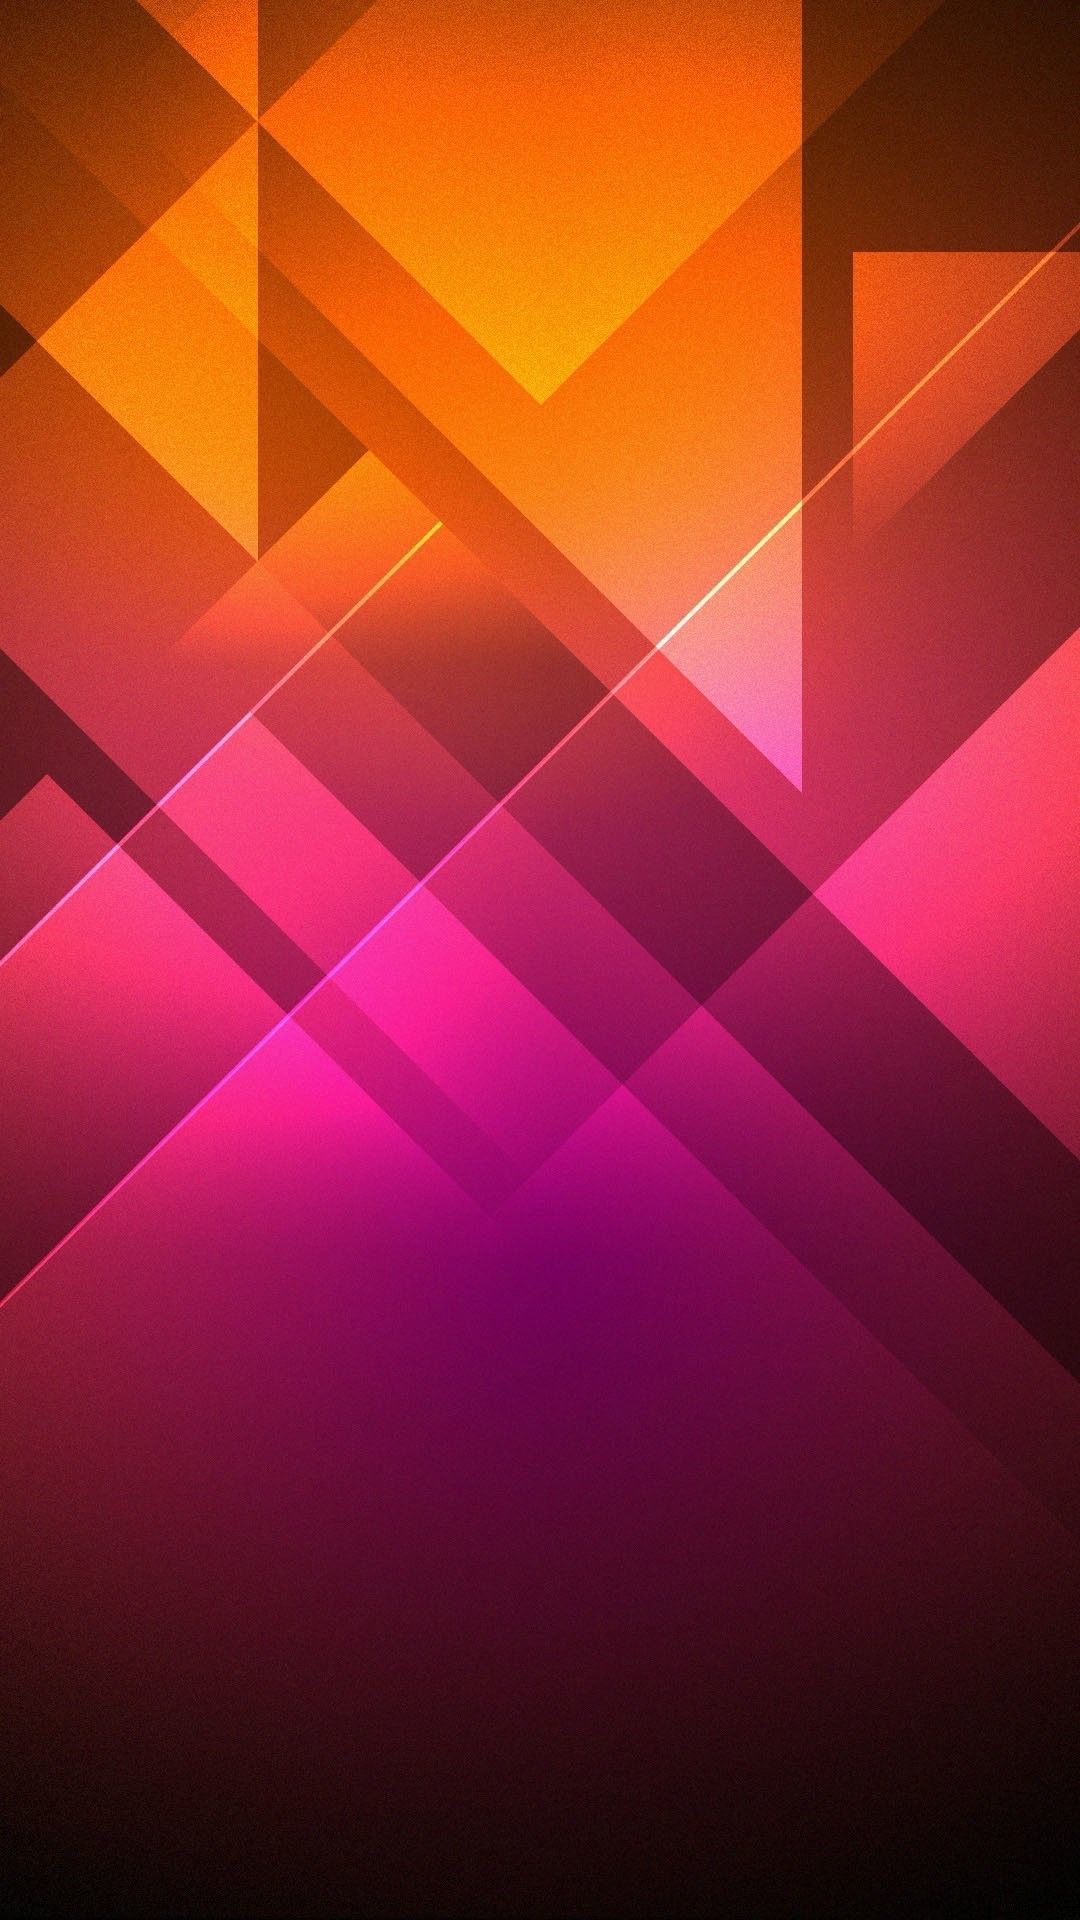 Abstract HD Wallpaper for Xiaomi Redmi Note 3